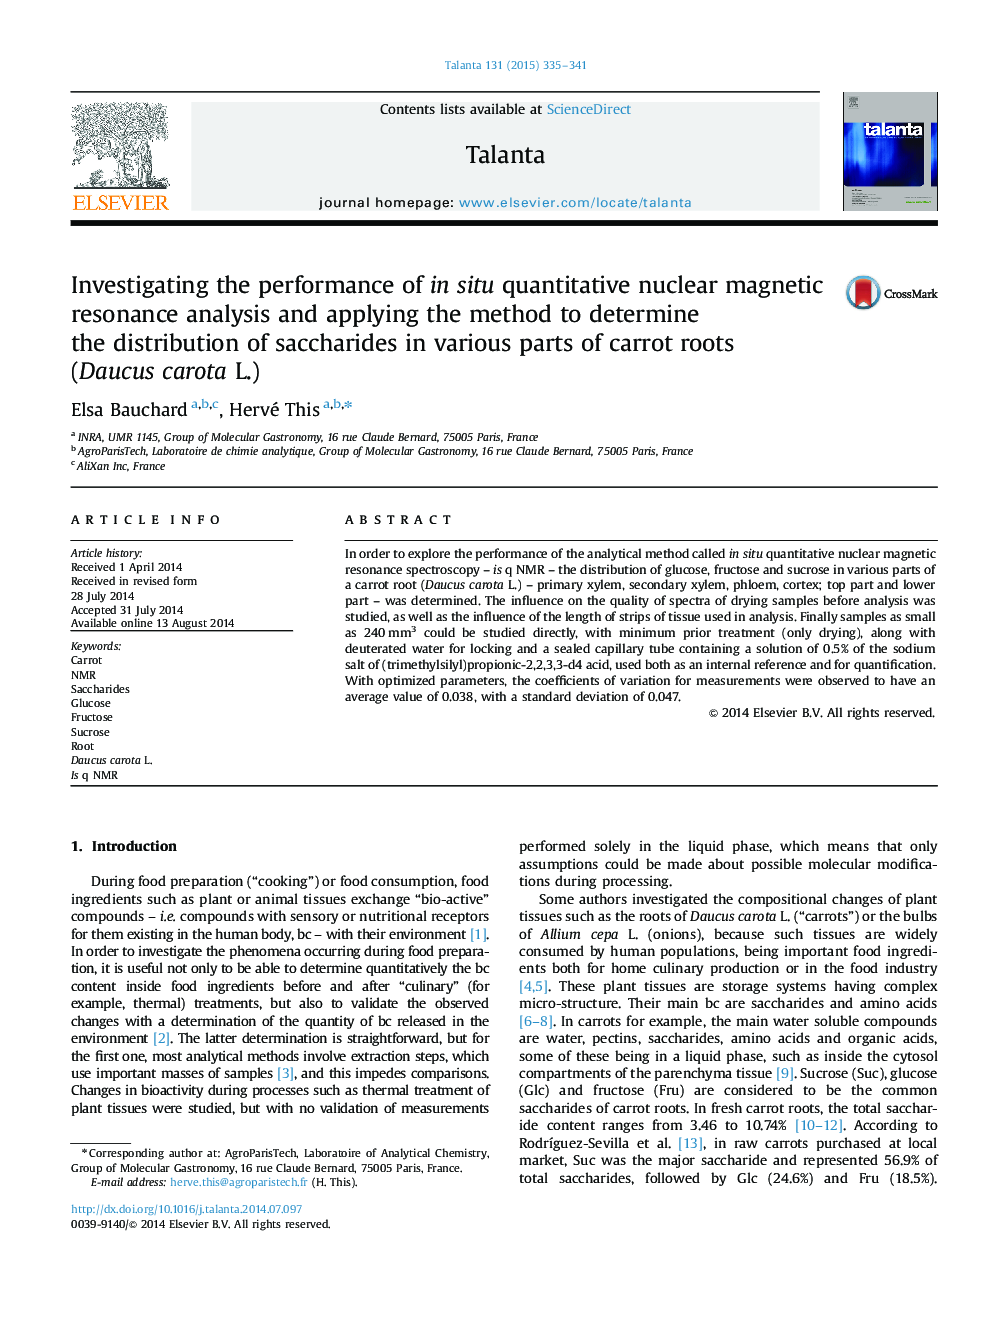 Investigating the performance of in situ quantitative nuclear magnetic resonance analysis and applying the method to determine the distribution of saccharides in various parts of carrot roots (Daucus carota L.)